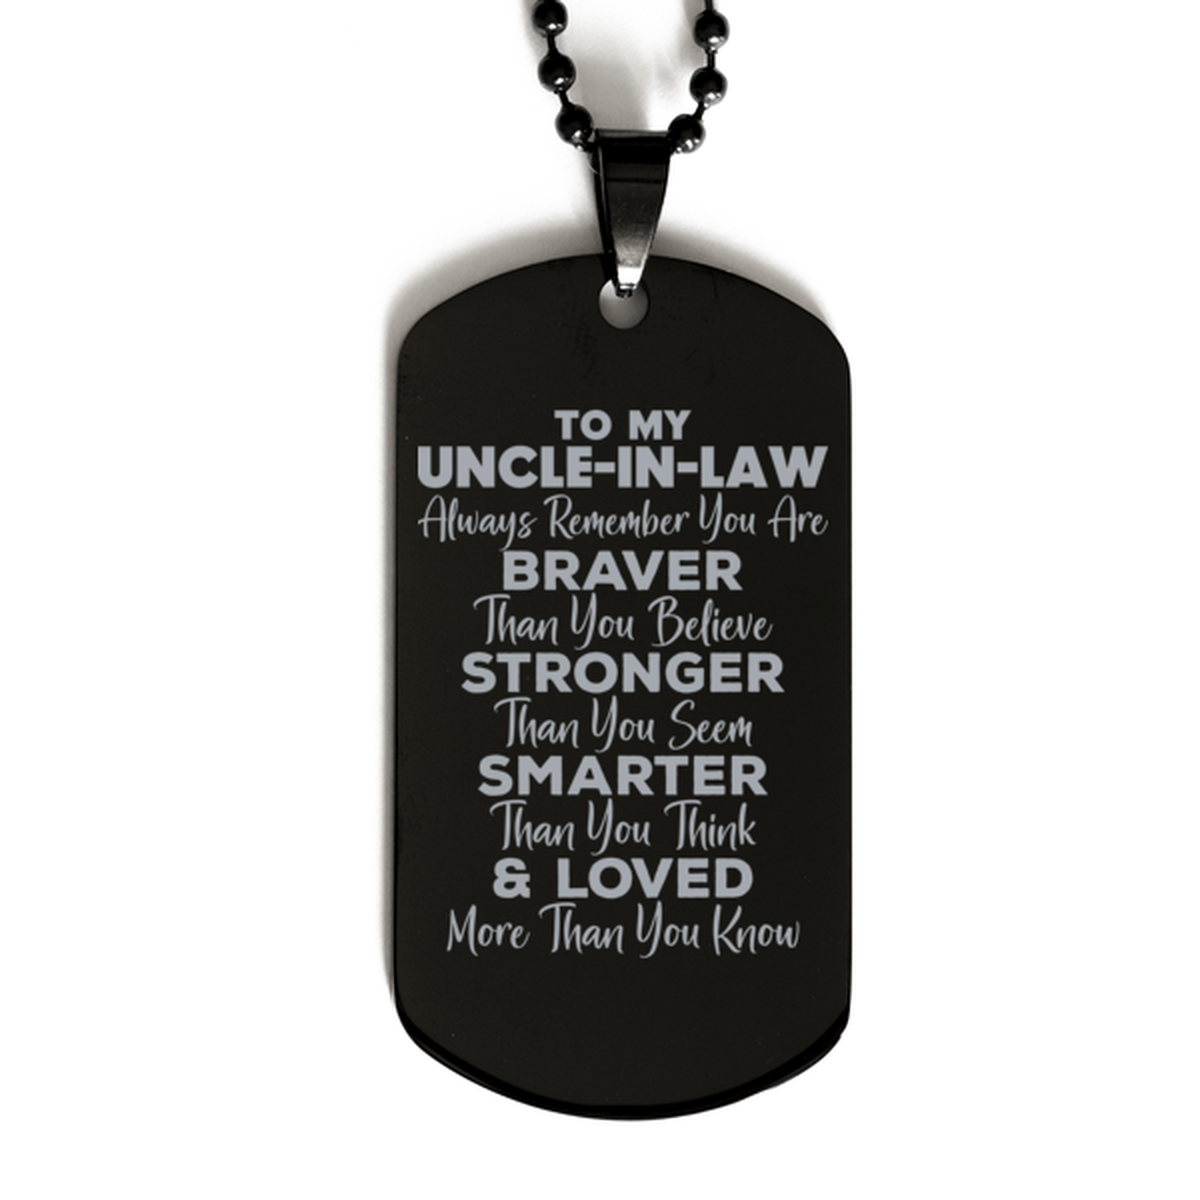 Motivational Uncle-in-law Black Dog Tag Necklace, Uncle-in-law Always Remember You Are Braver Than You Believe, Best Birthday Gifts for Uncle-in-law